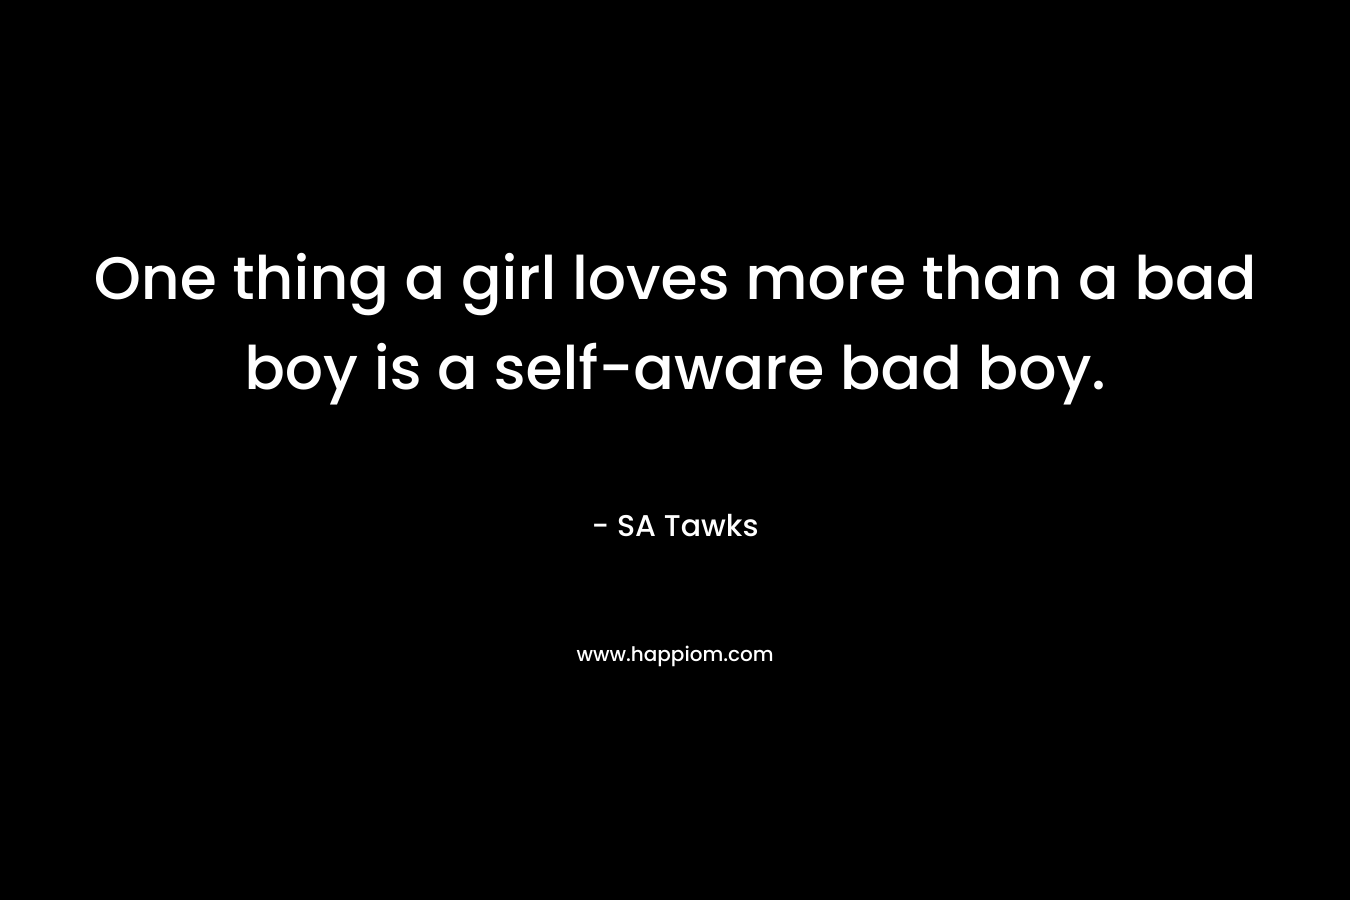 One thing a girl loves more than a bad boy is a self-aware bad boy.